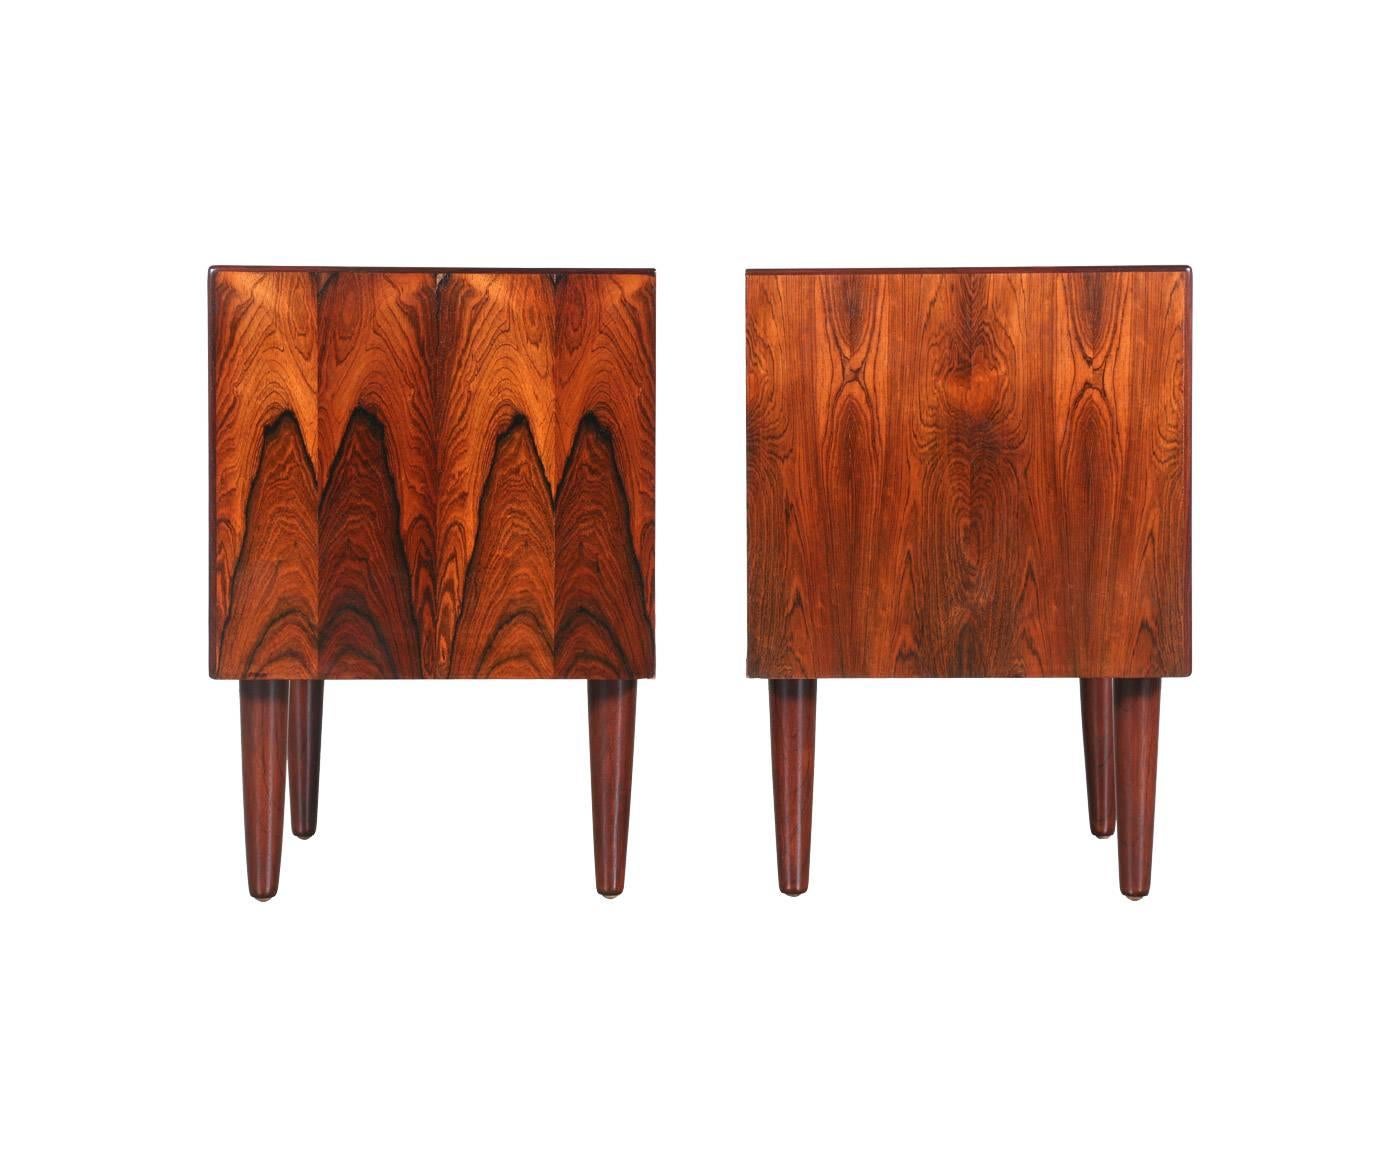 Designer: Westnofa.
Manufacturer: Westnofa.
Period/Style: Norwegian Modern.
Country: Norway.
Date: 1960s.

Dimensions: 22.75″ H x 20.5″ W x 15.5″ D.
Materials: Rosewood.
Condition: Excellent, newly refinished.
Number of items: Two.
ID